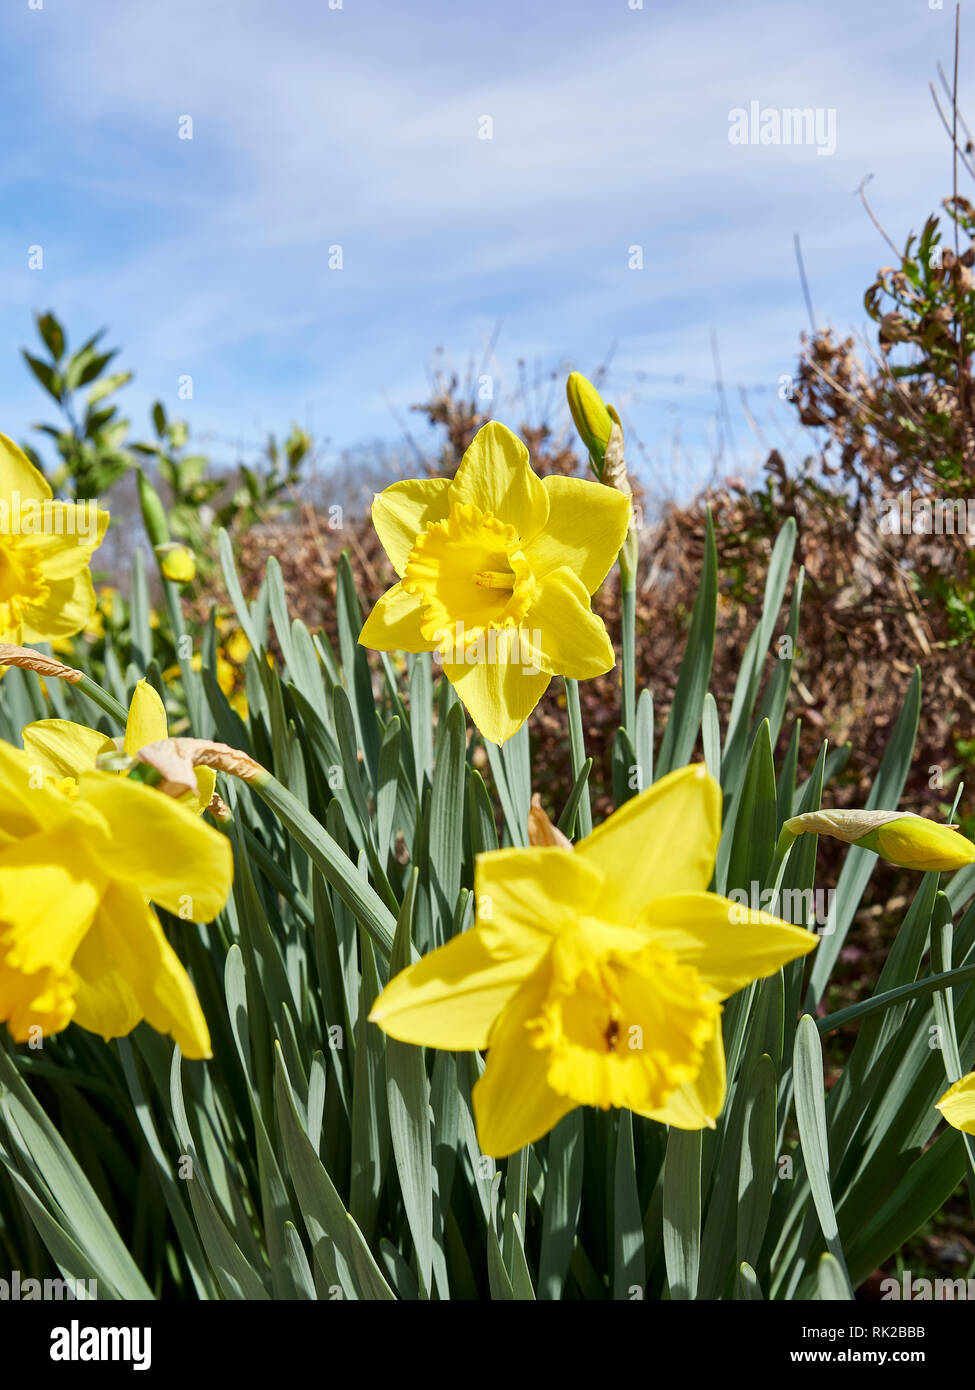 Daffodil or narcissus of the amaryllidaceae family of bright yellow and early blooming garden flower grown in home gardens. Stock Photo